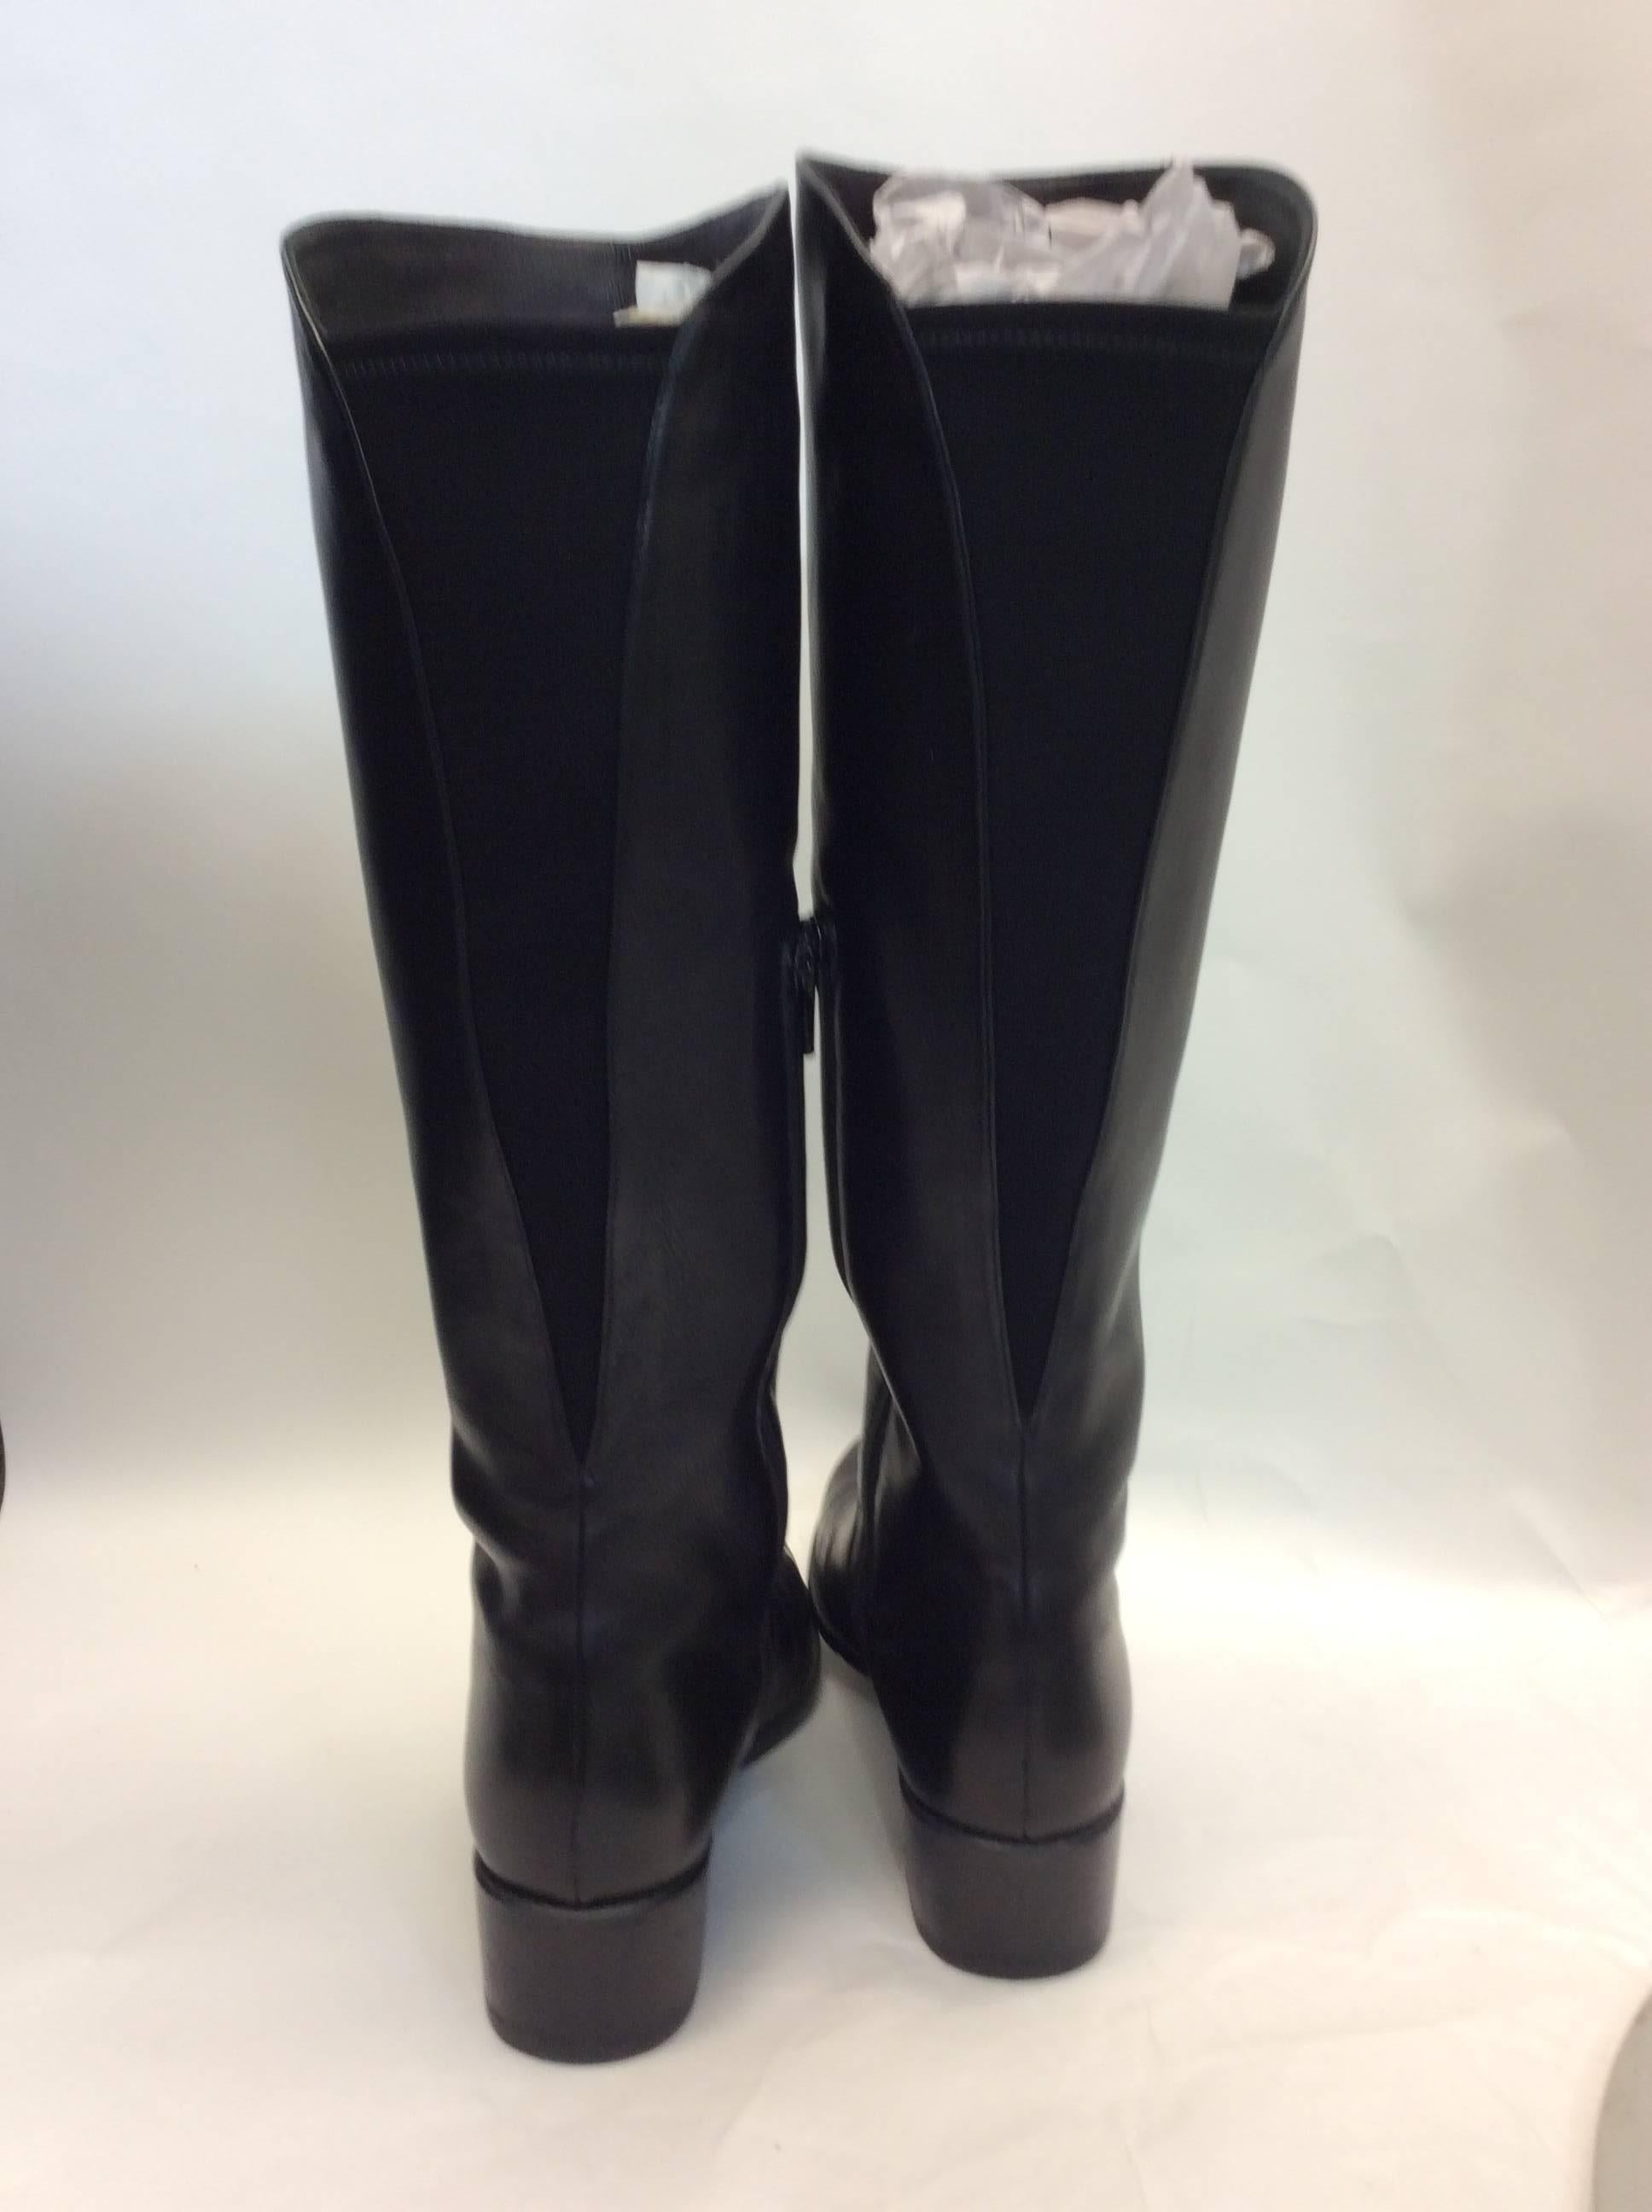 Black Stuart Weitzman Leather Boots In Excellent Condition For Sale In Narberth, PA